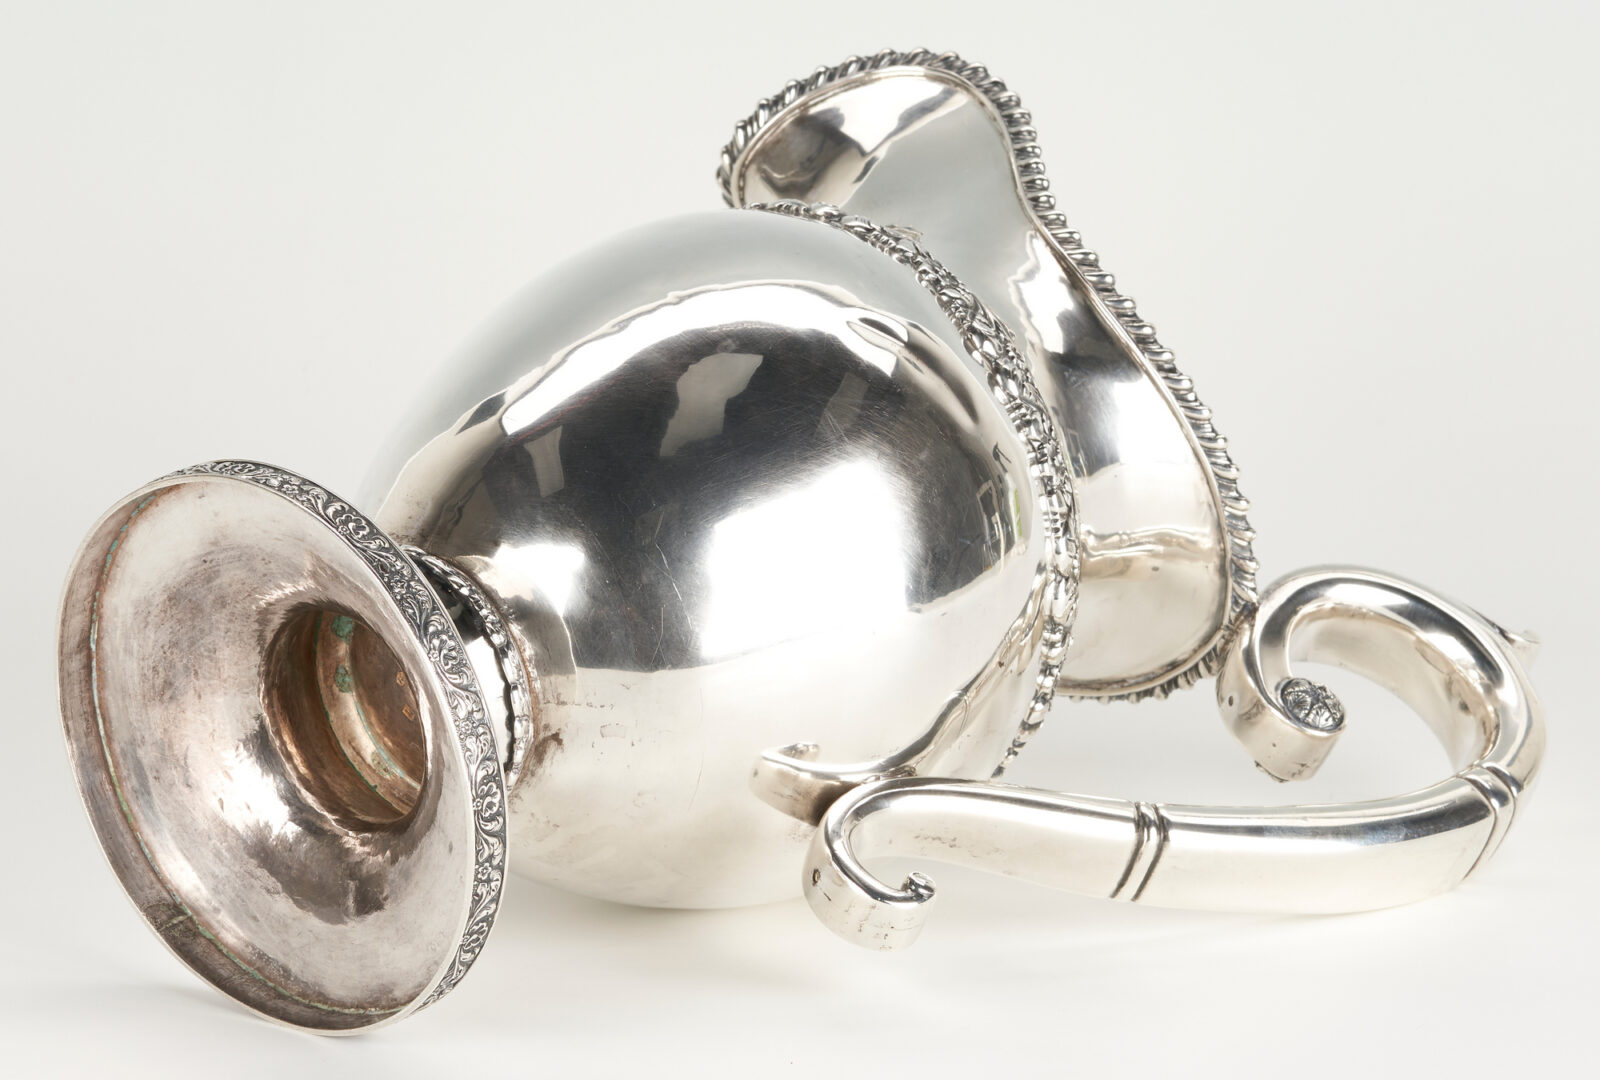 Lot 97: Frederick Marquand Coin Silver Water Pitcher